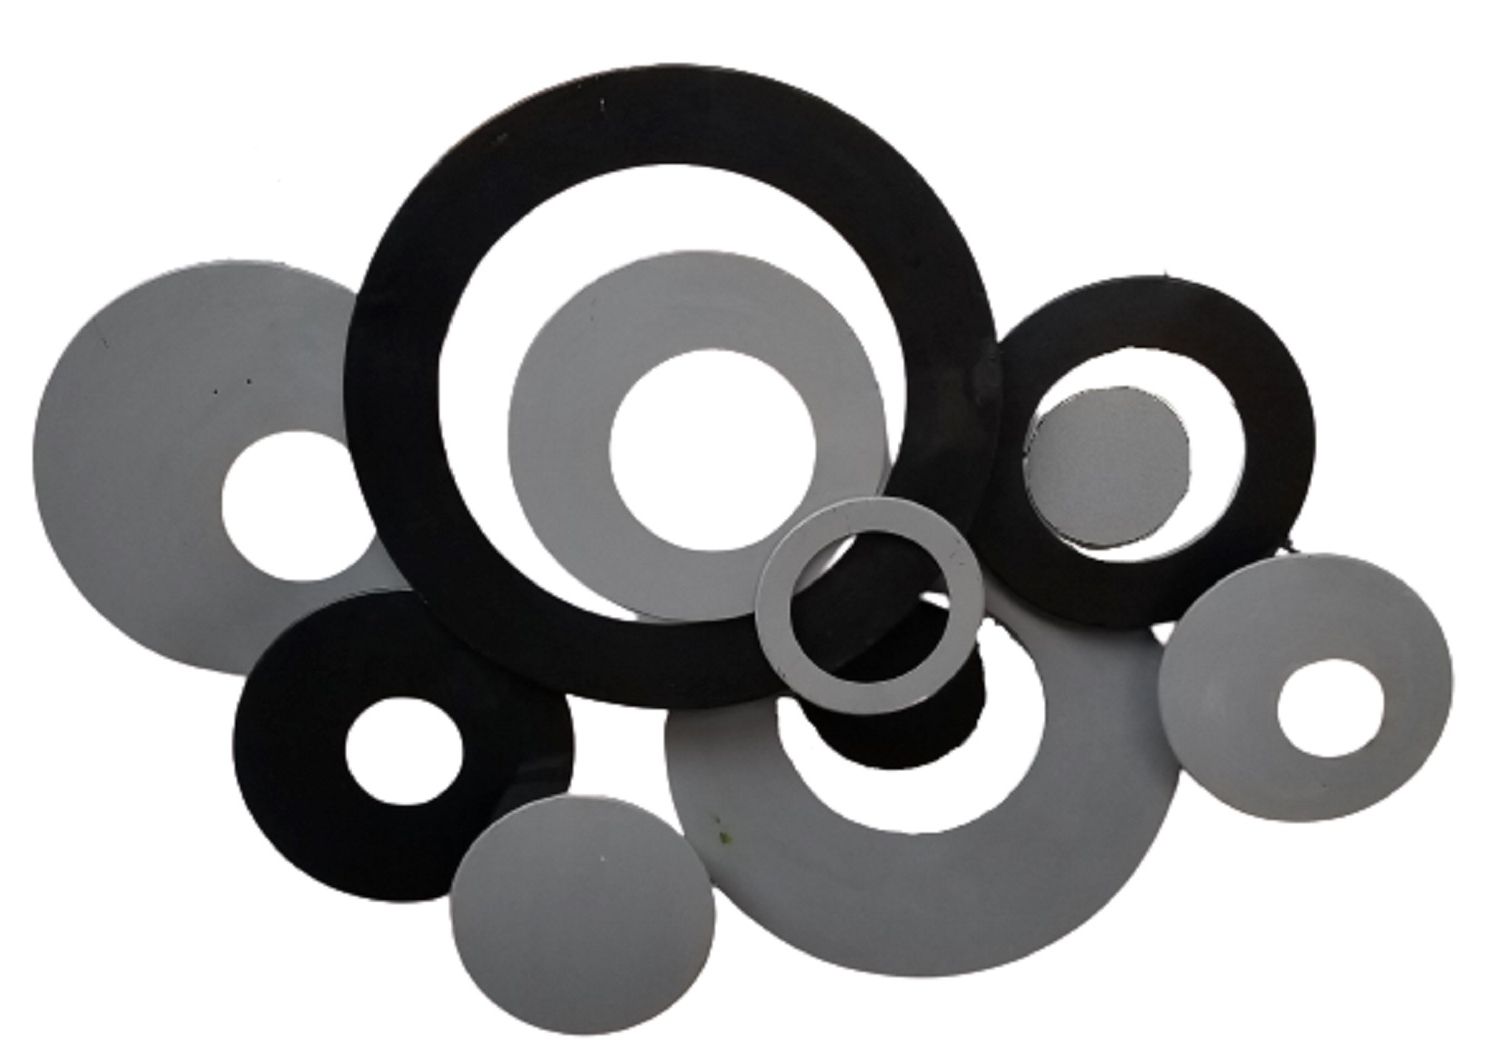 Metal Wall Art – Charcoal Linked Circle Disc Abstract Intended For 2018 Gray Metal Wall Art (Photo 10 of 15)